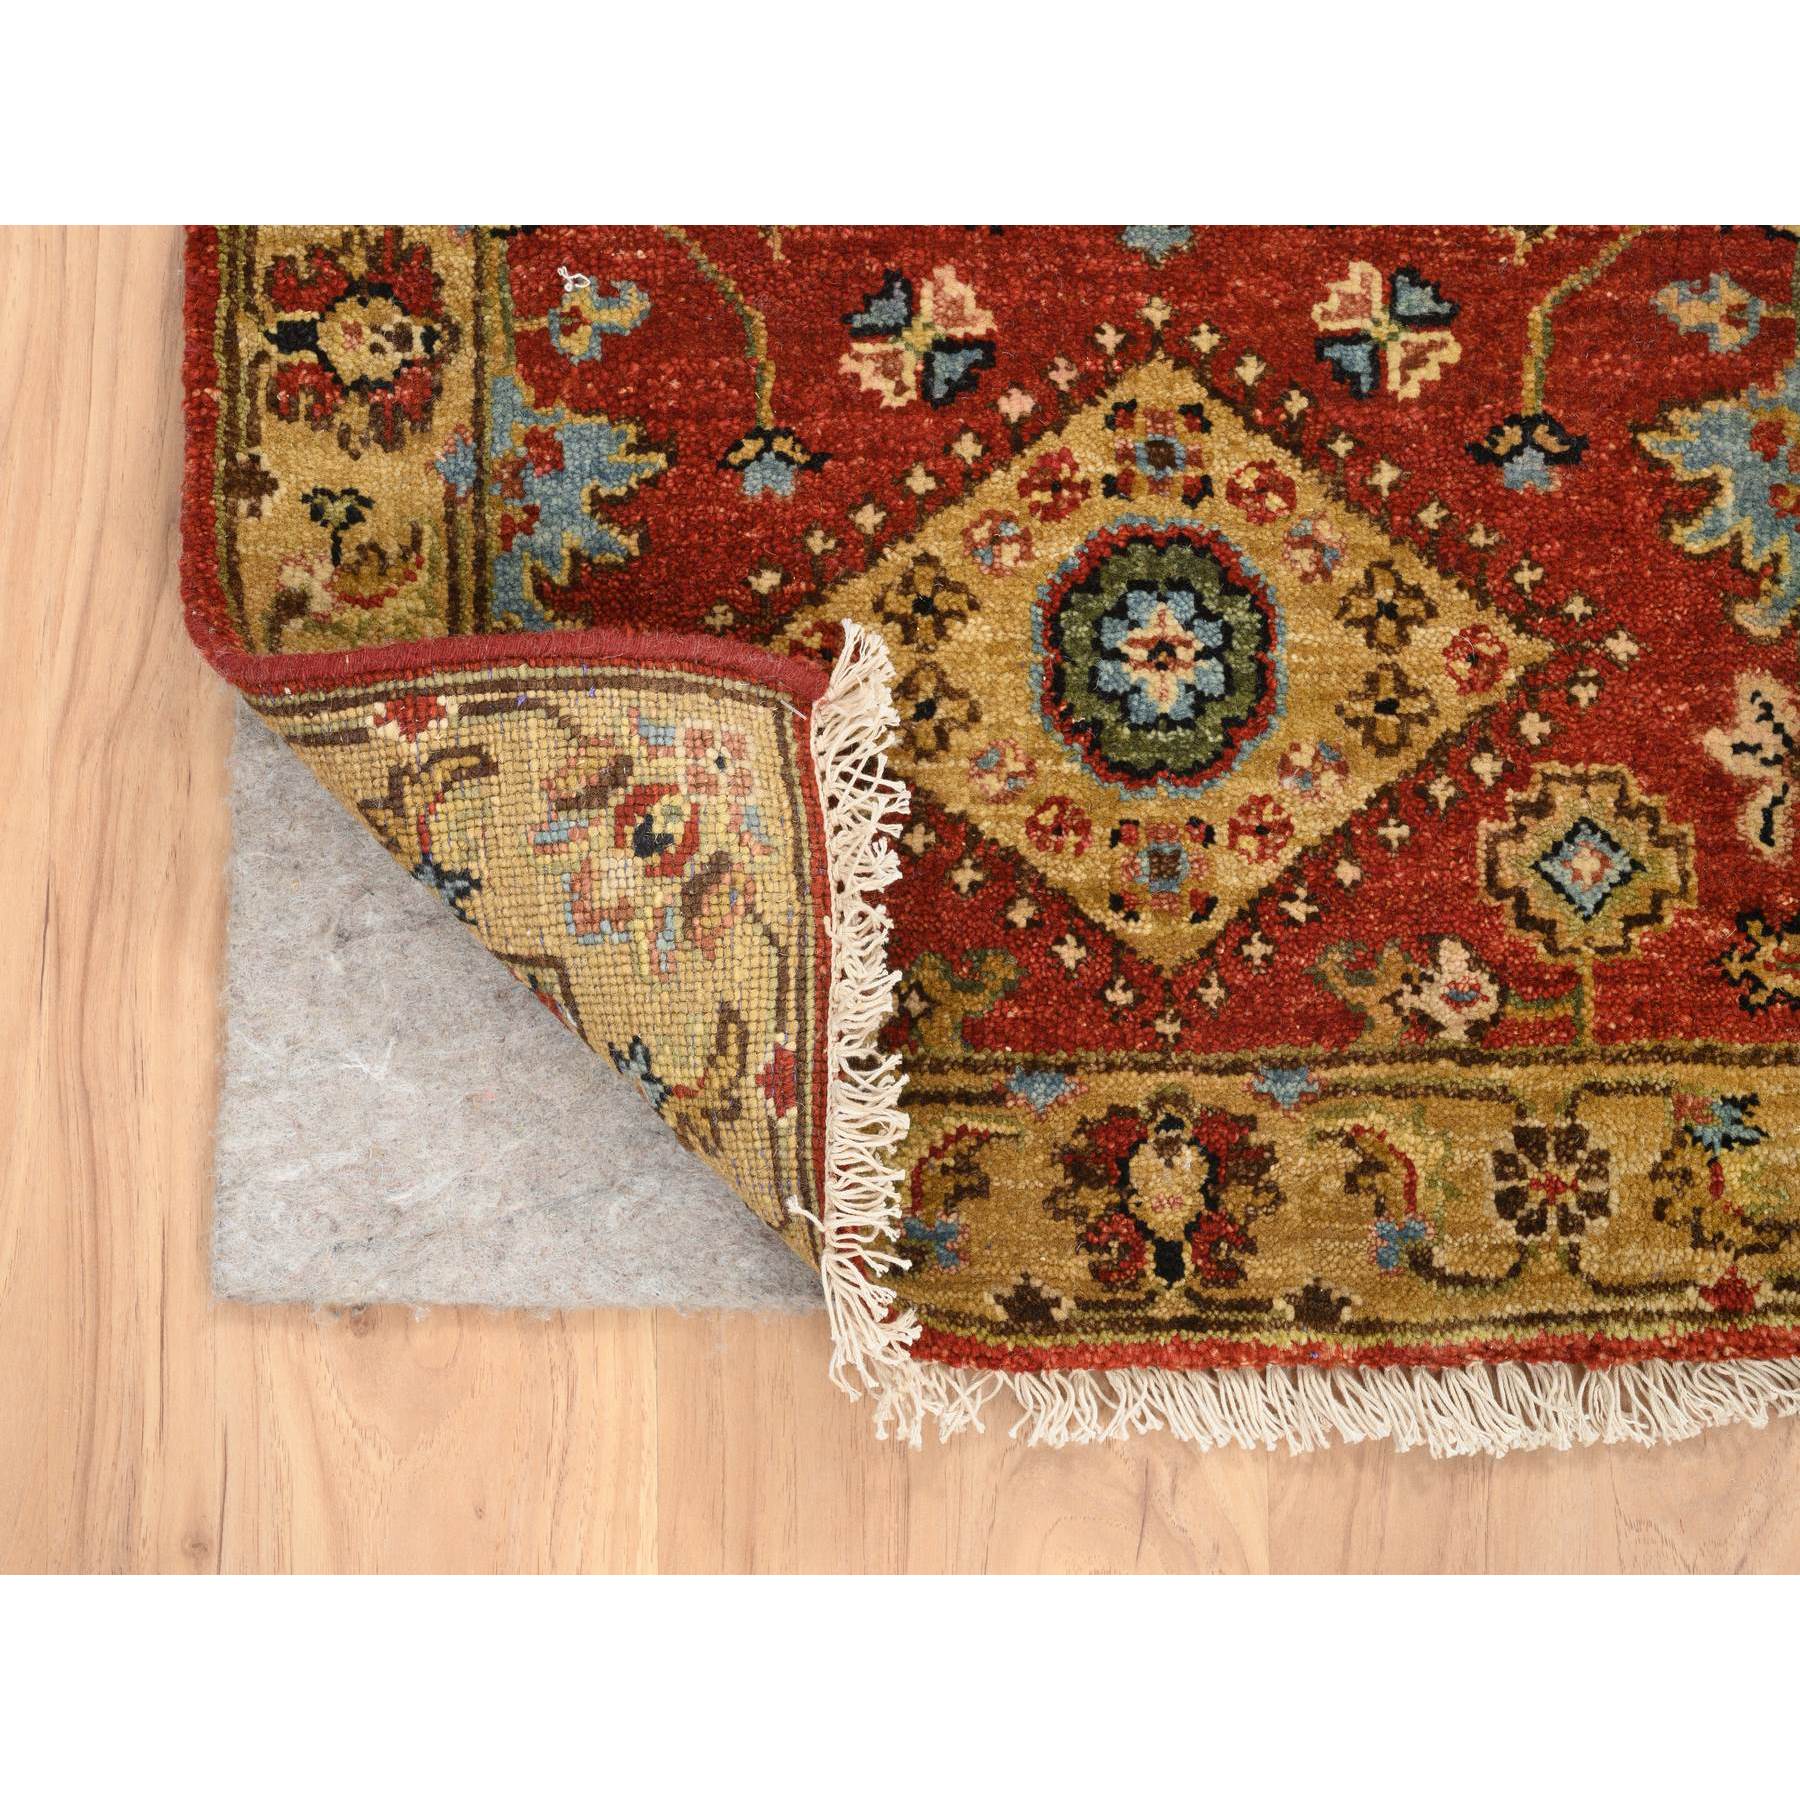 2'1"x3' Red-Gold, Karajeh Design, with Geometric Medallions Design, Hand Woven, Pure Wool, Oriental Rug 